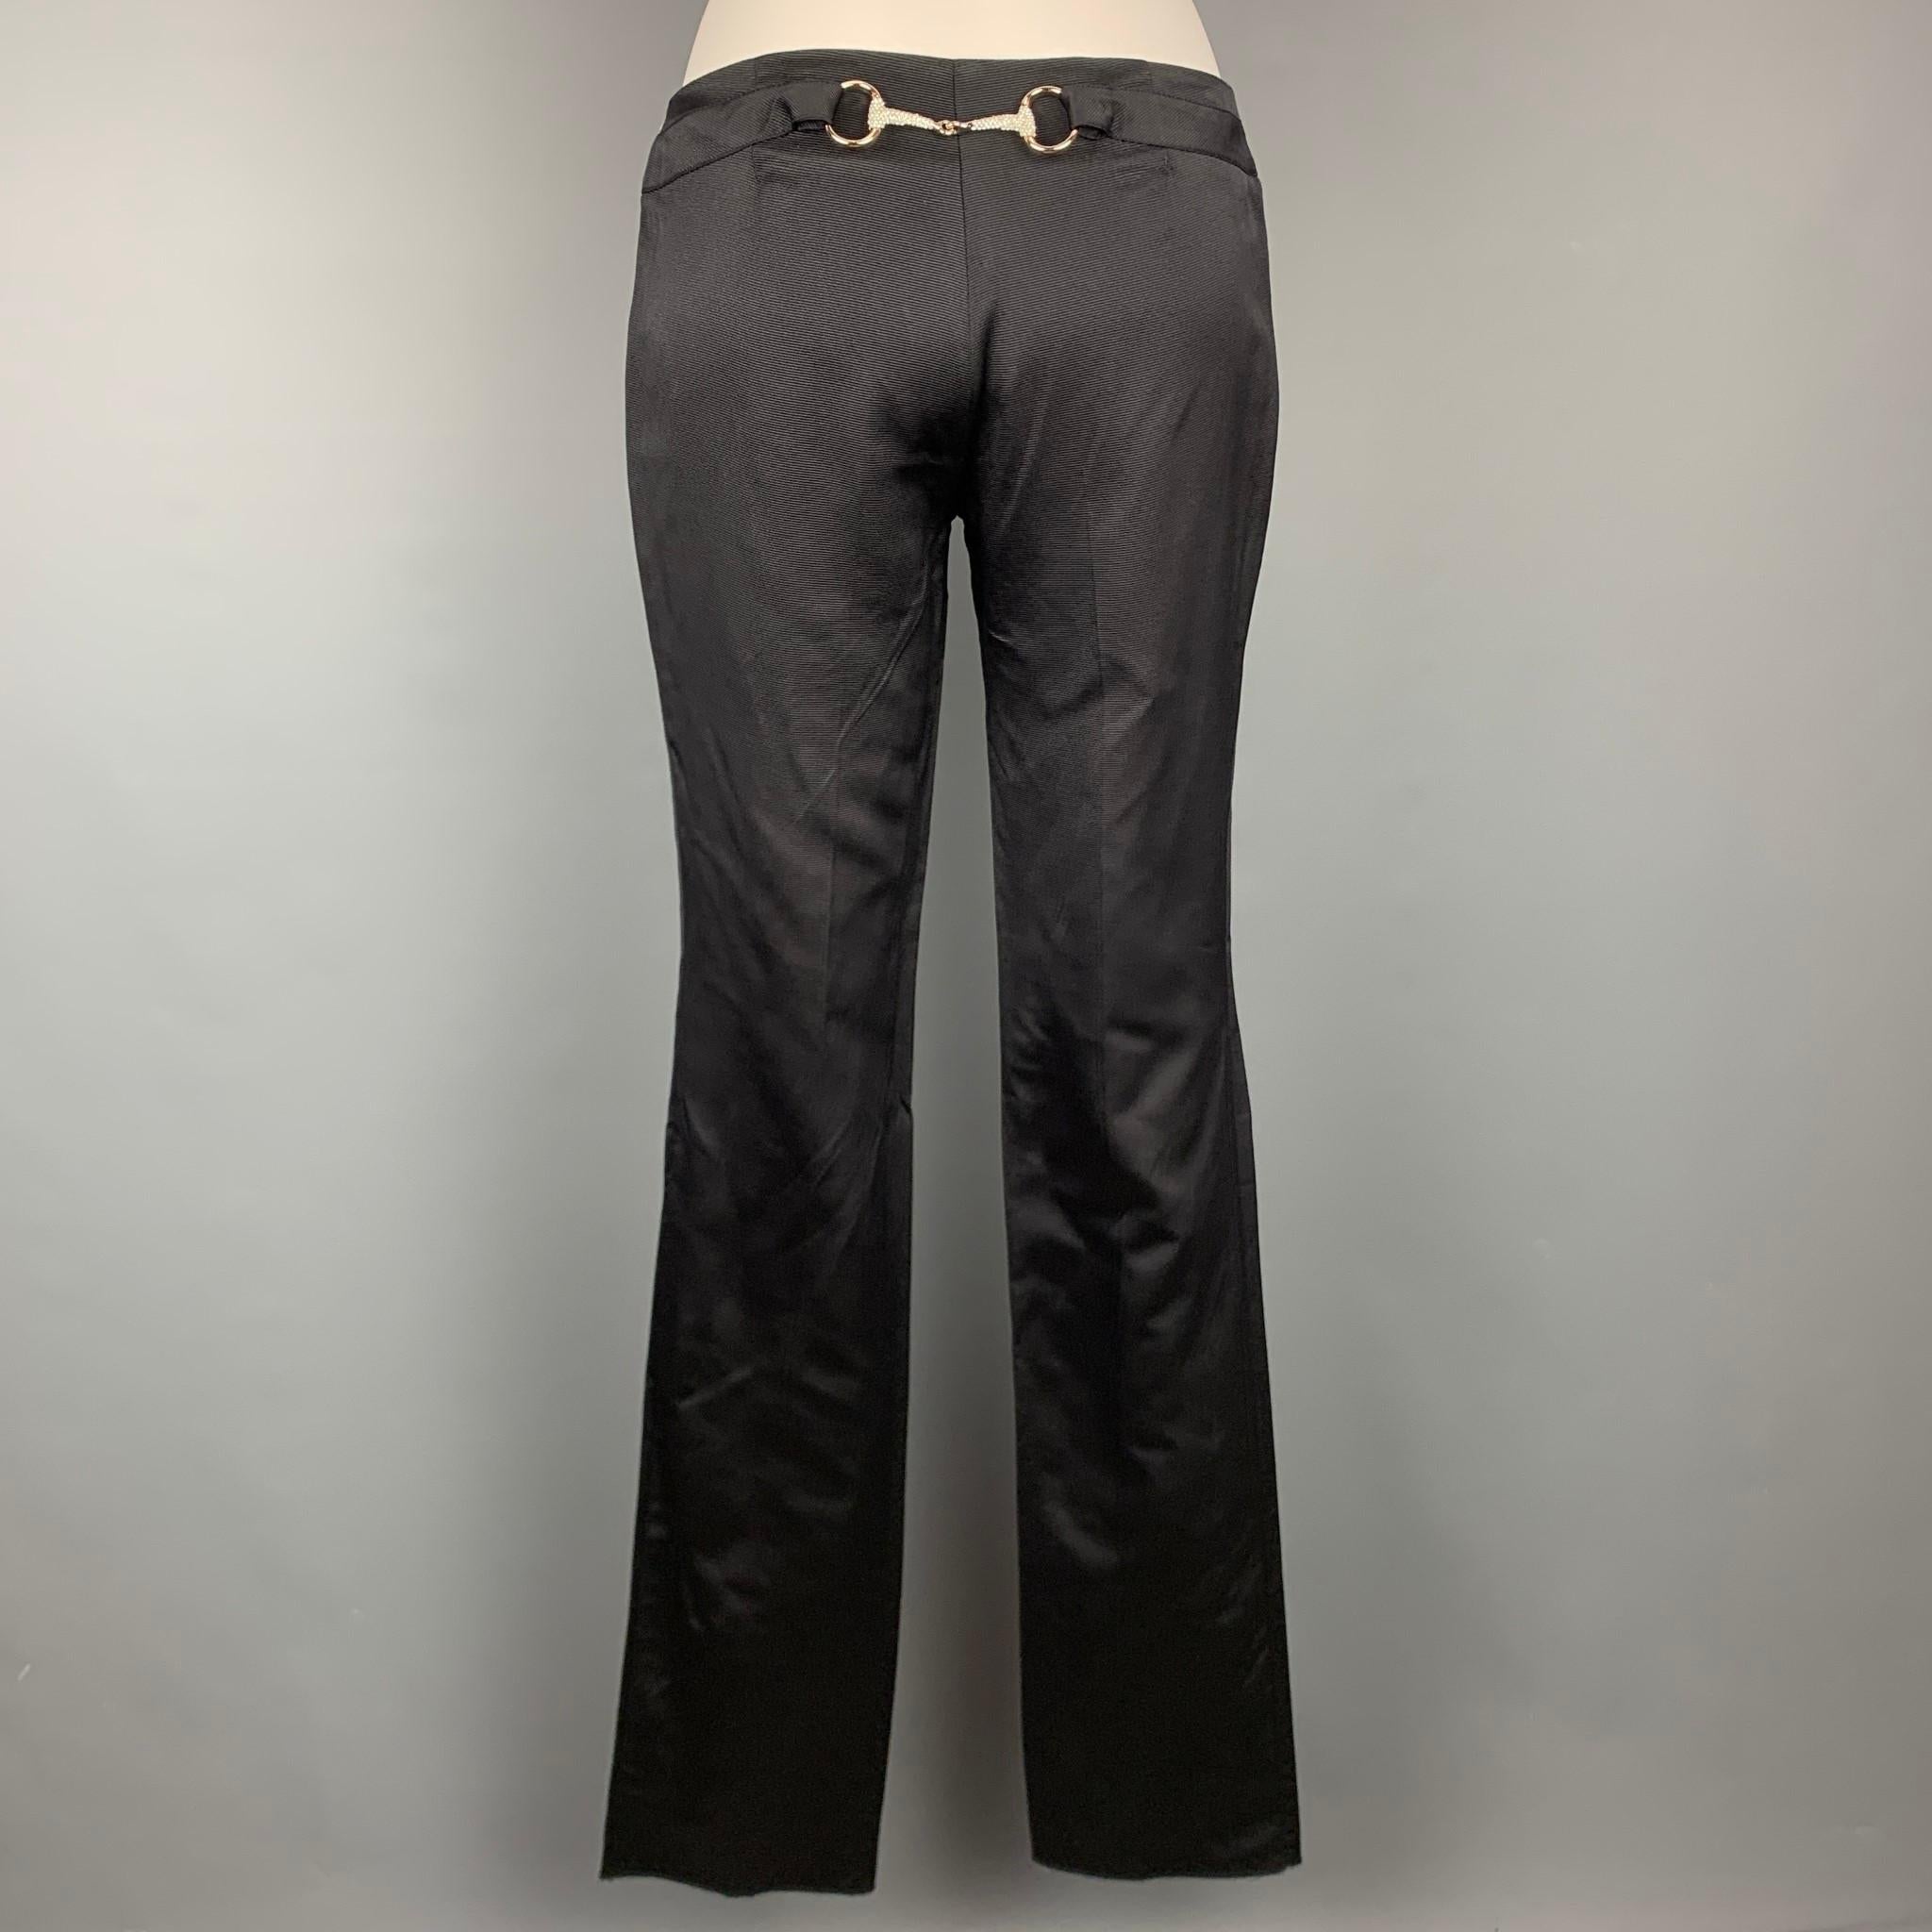 GUCCI by TOM FORD dress pants comes in a black ribbed silk / cotton featuring a straight leg, front tab, back rhinestone horse bit detail, and a zip fly closure. Made in Italy.

Very Good Pre-Owned Condition.
Marked: IT 38

Measurements:

Waist: 30